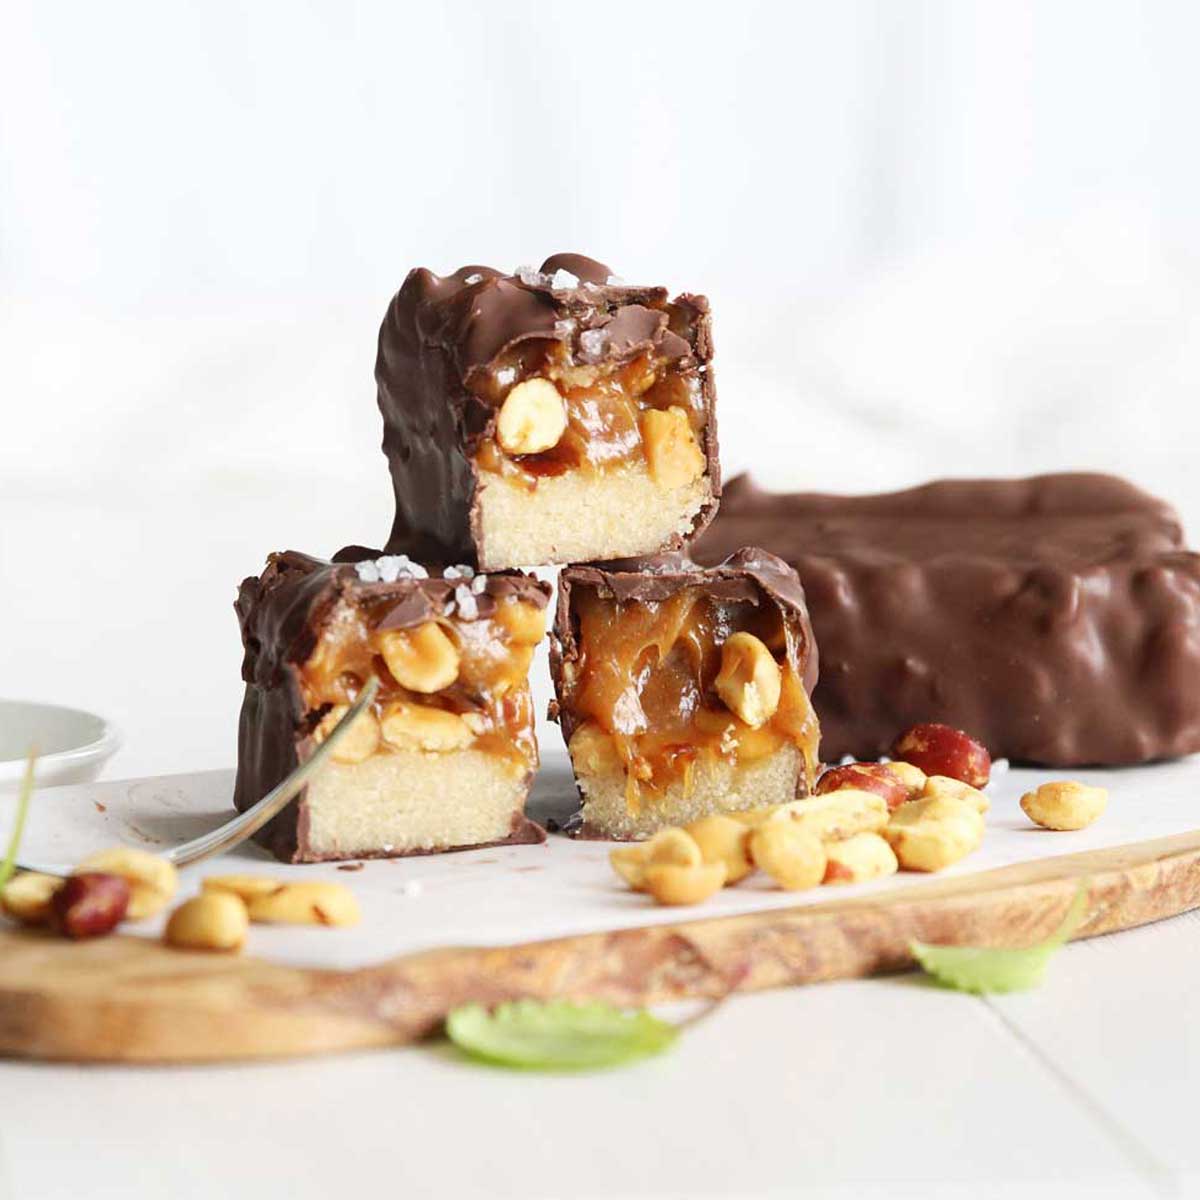 Guilt-Free Keto Snickers Protein Bars made with Collagen Peptides Powder - Nutella Protein Bars